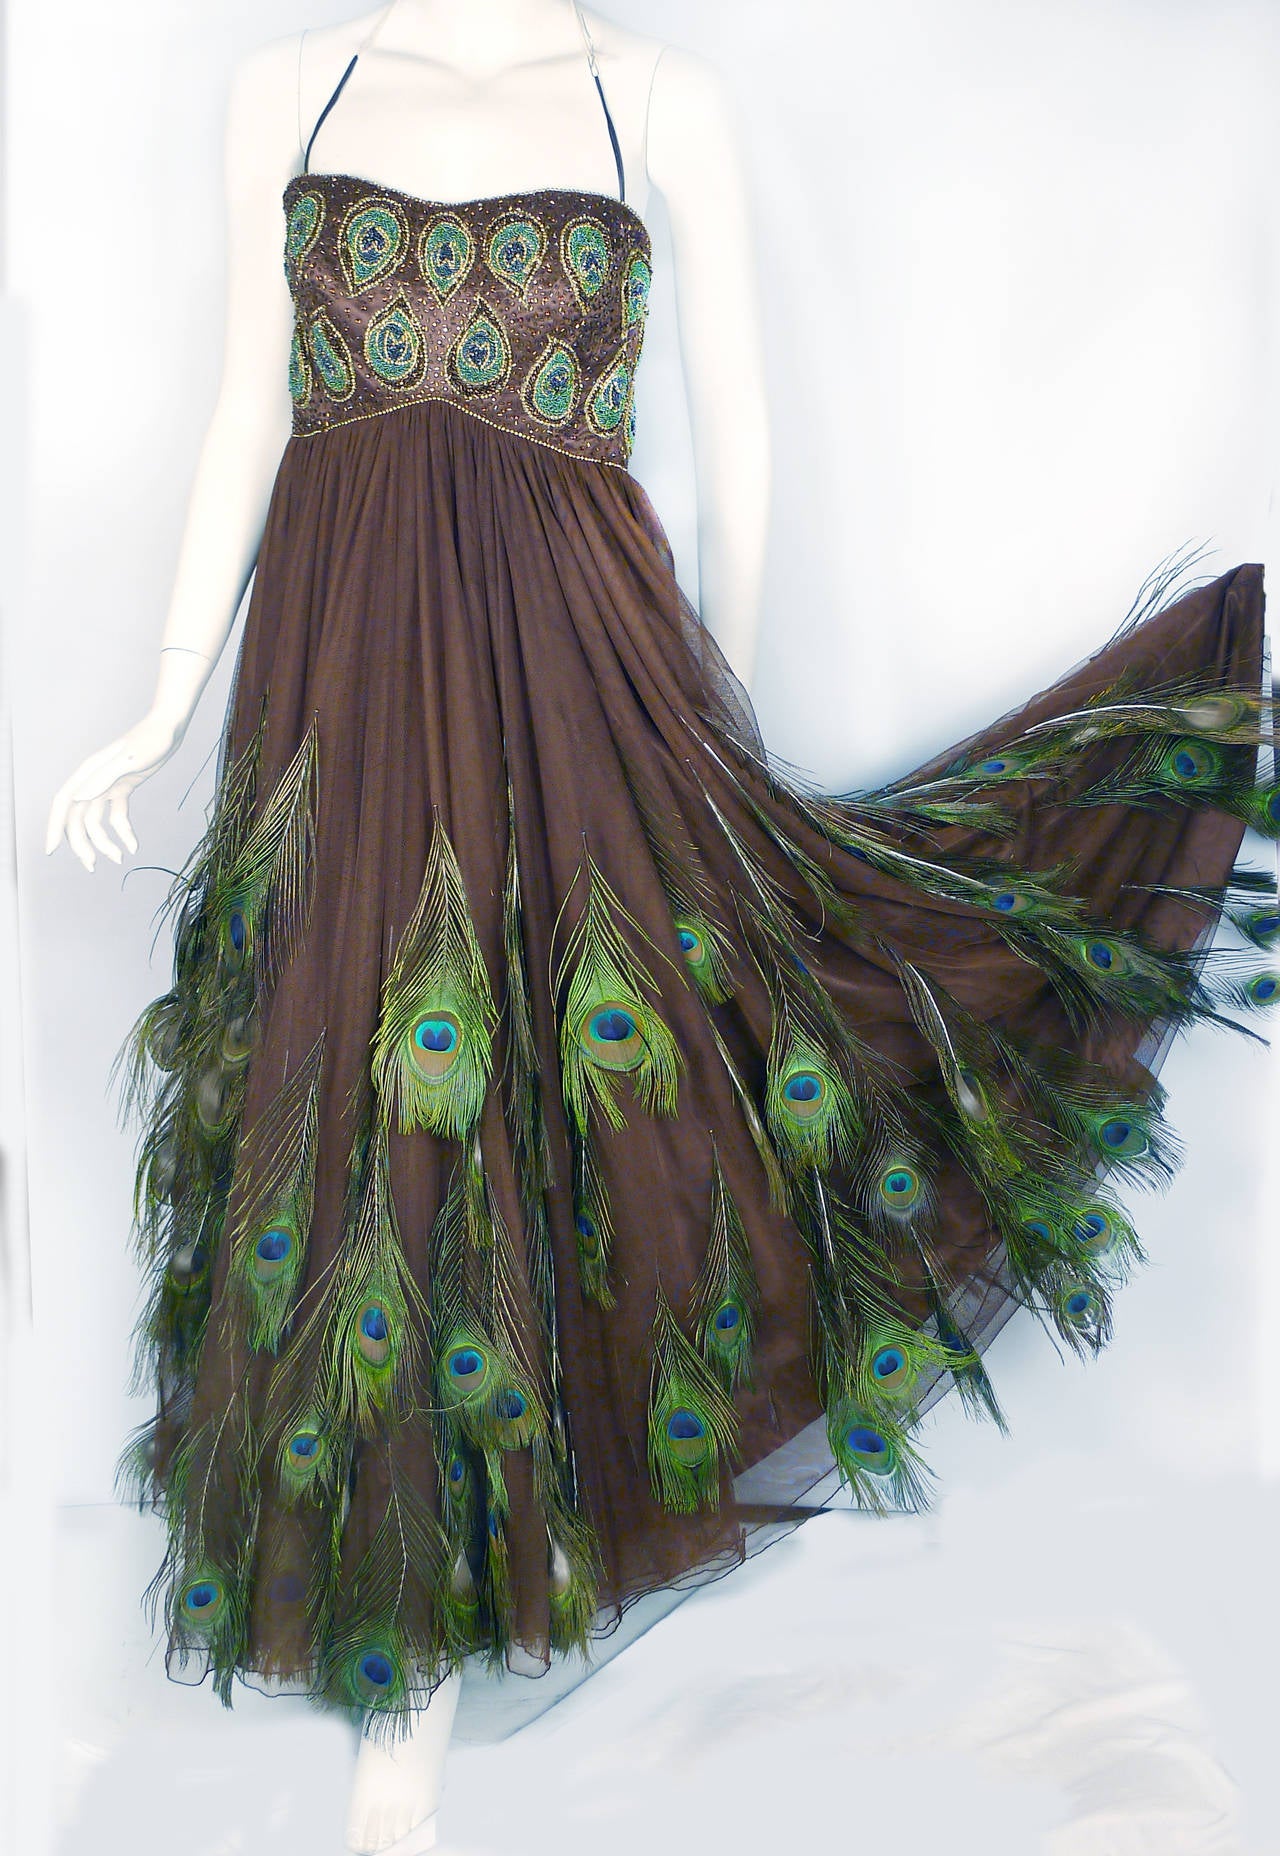 Stunning chocolate tulle evening gown over silk satin will leave your admirers breathless and in awe of your natural beauty.  Why paint the peacock?!  Gown features Empire Waist with extensive bead work on the bodice.  Authentic peacock feathers